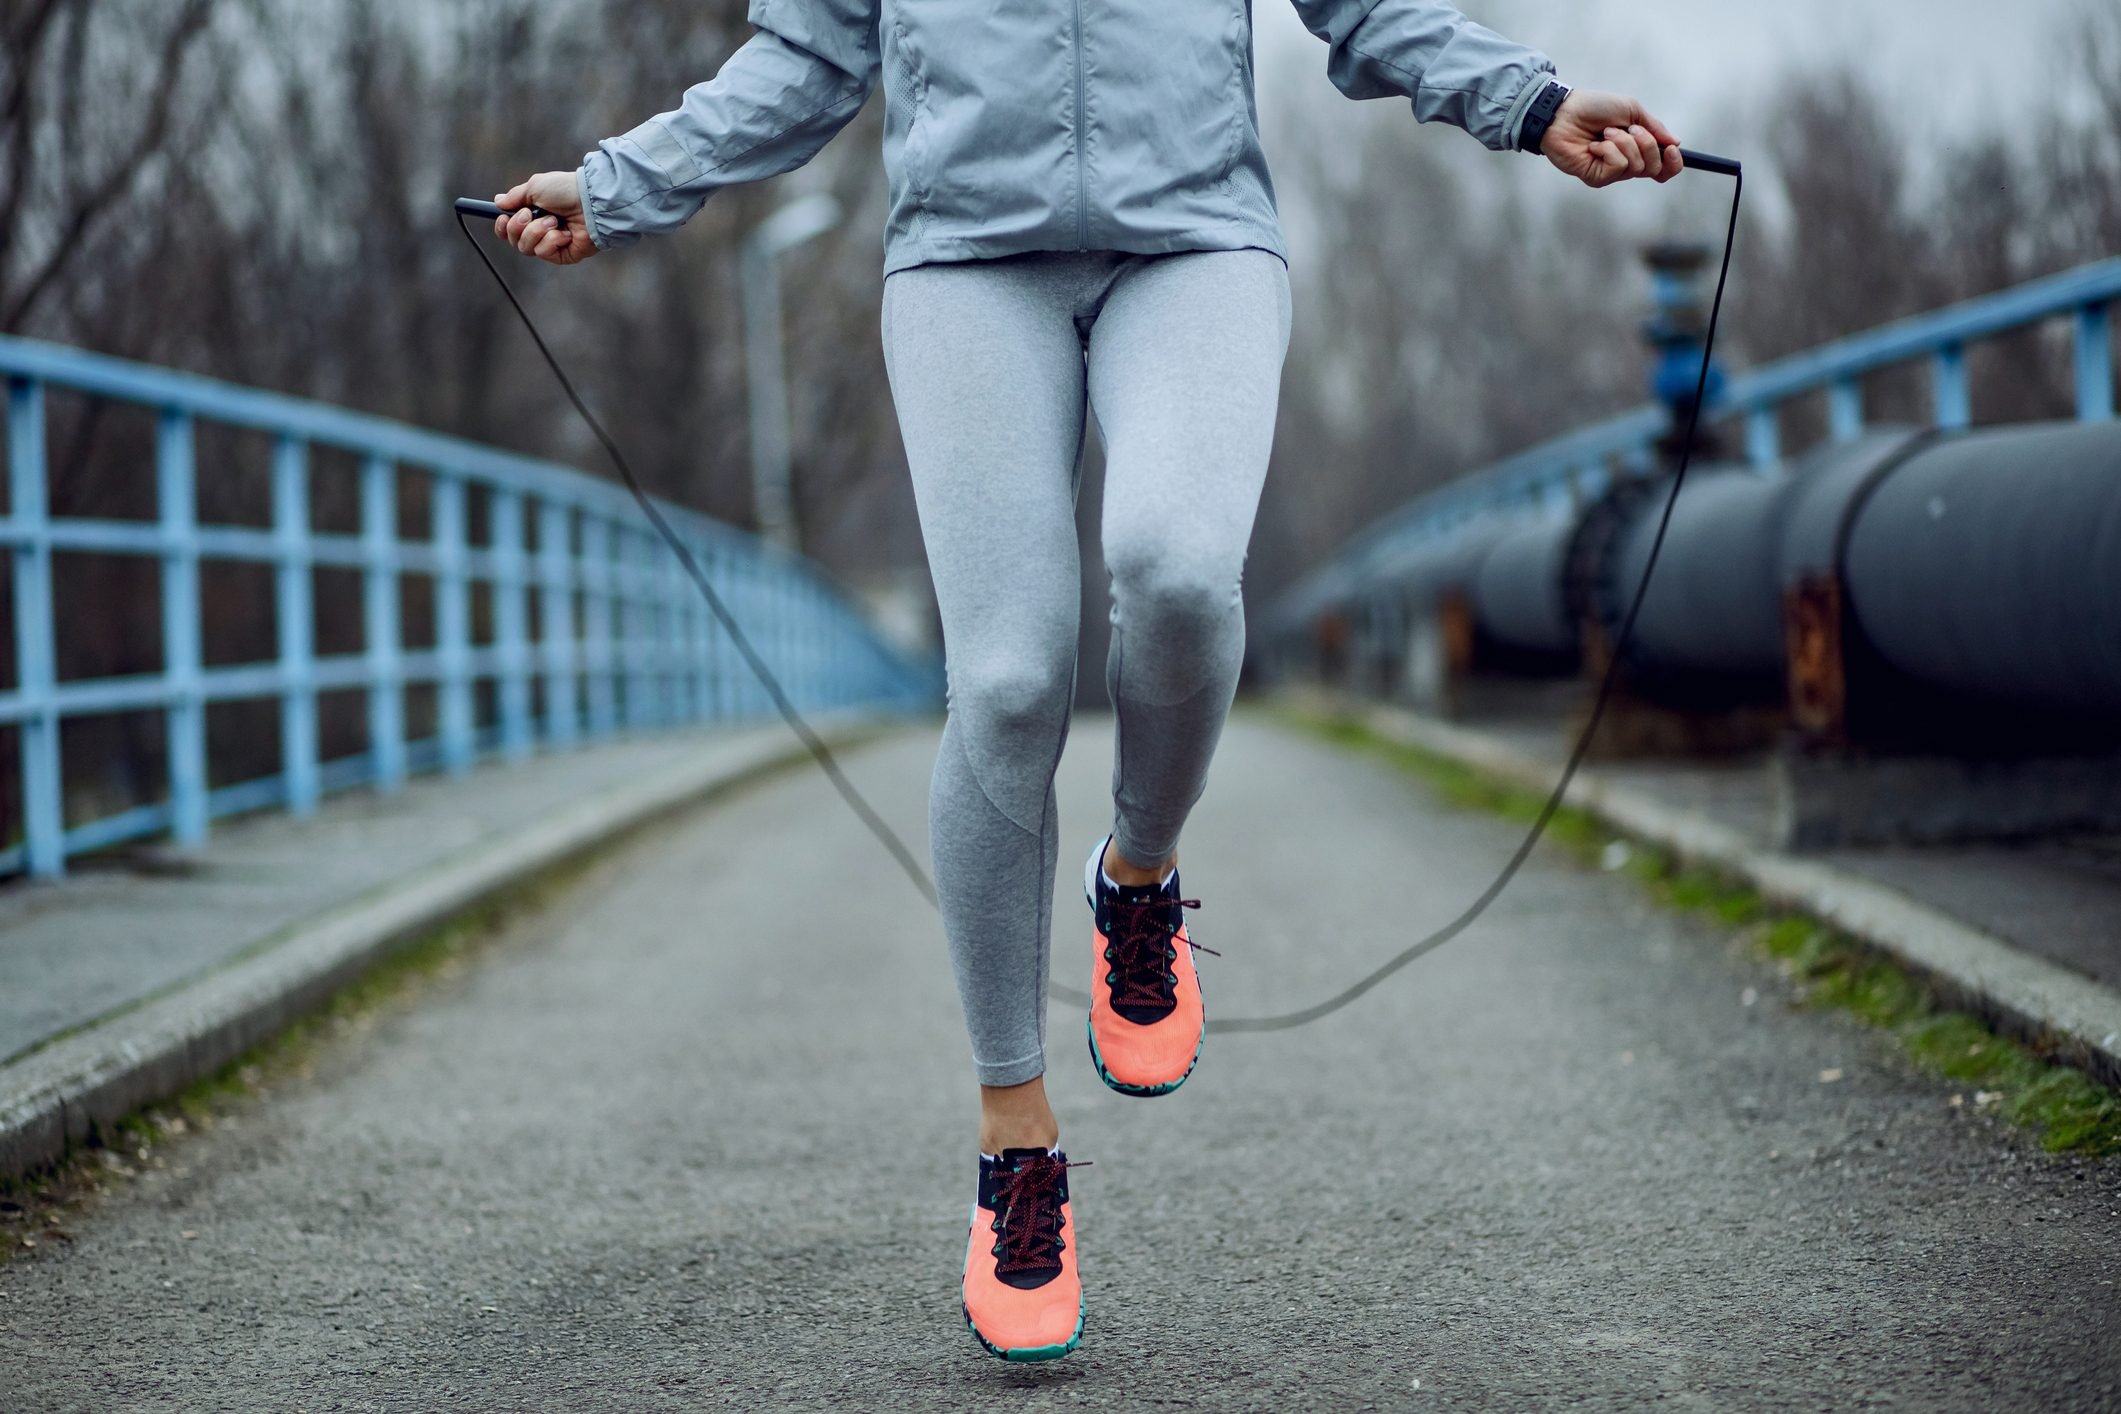 The Jump Rope Workout That Challenges Your Calves, Cardio, and Coordination